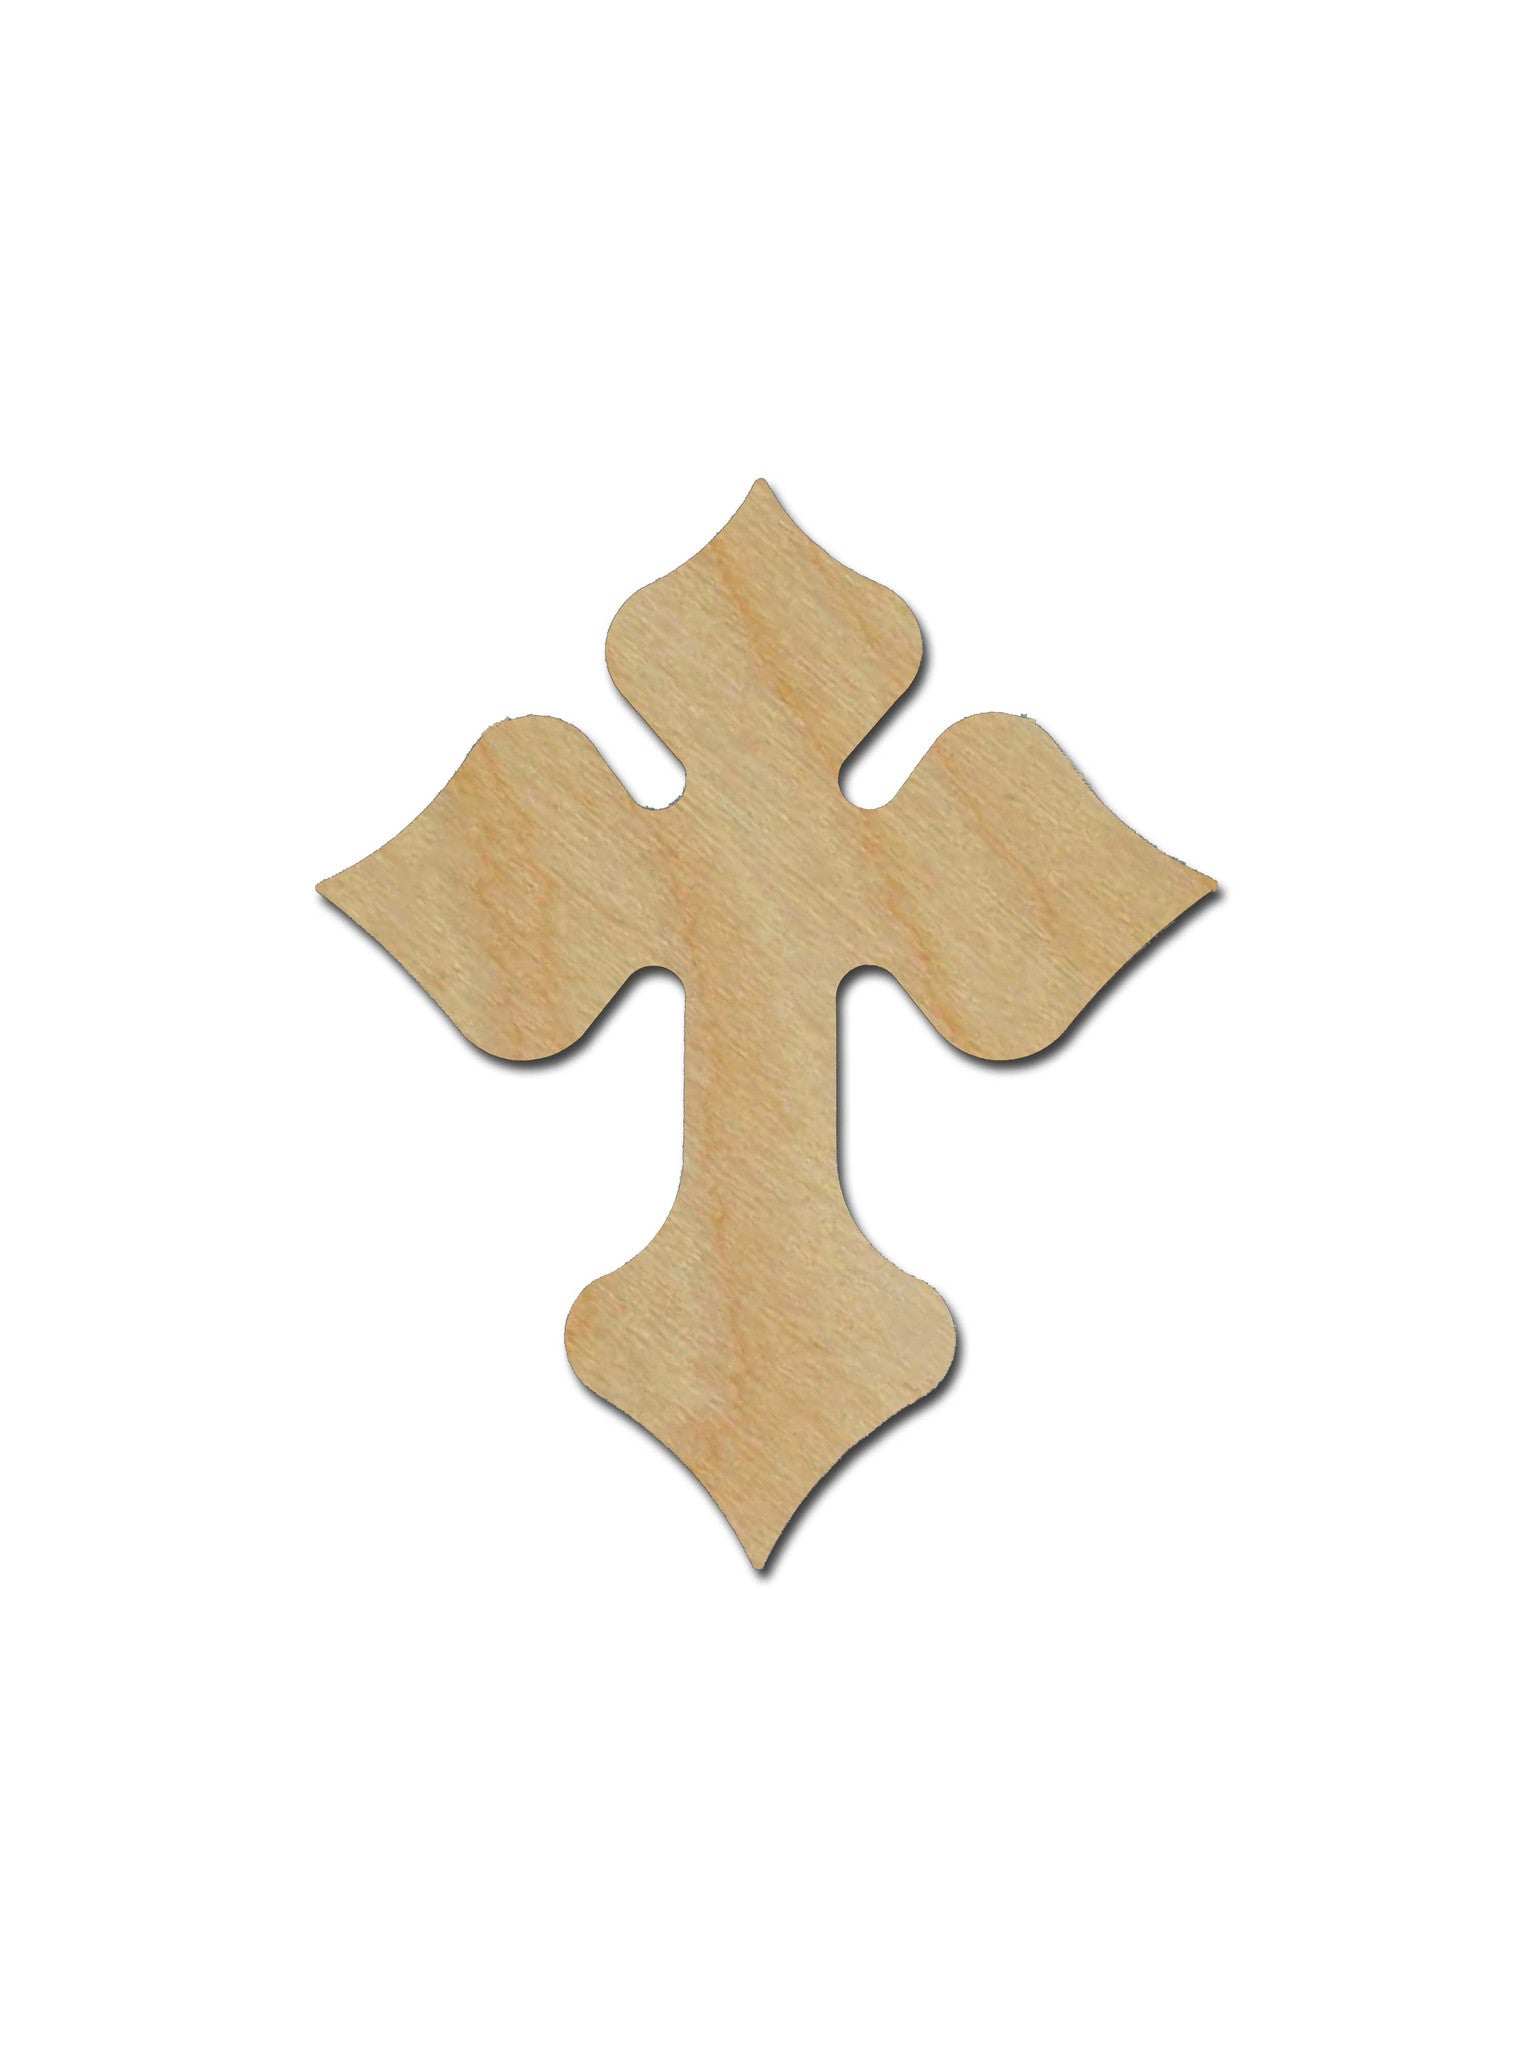 Unfinished Wood Cross MDF Craft Crosses Variety of Sizes 